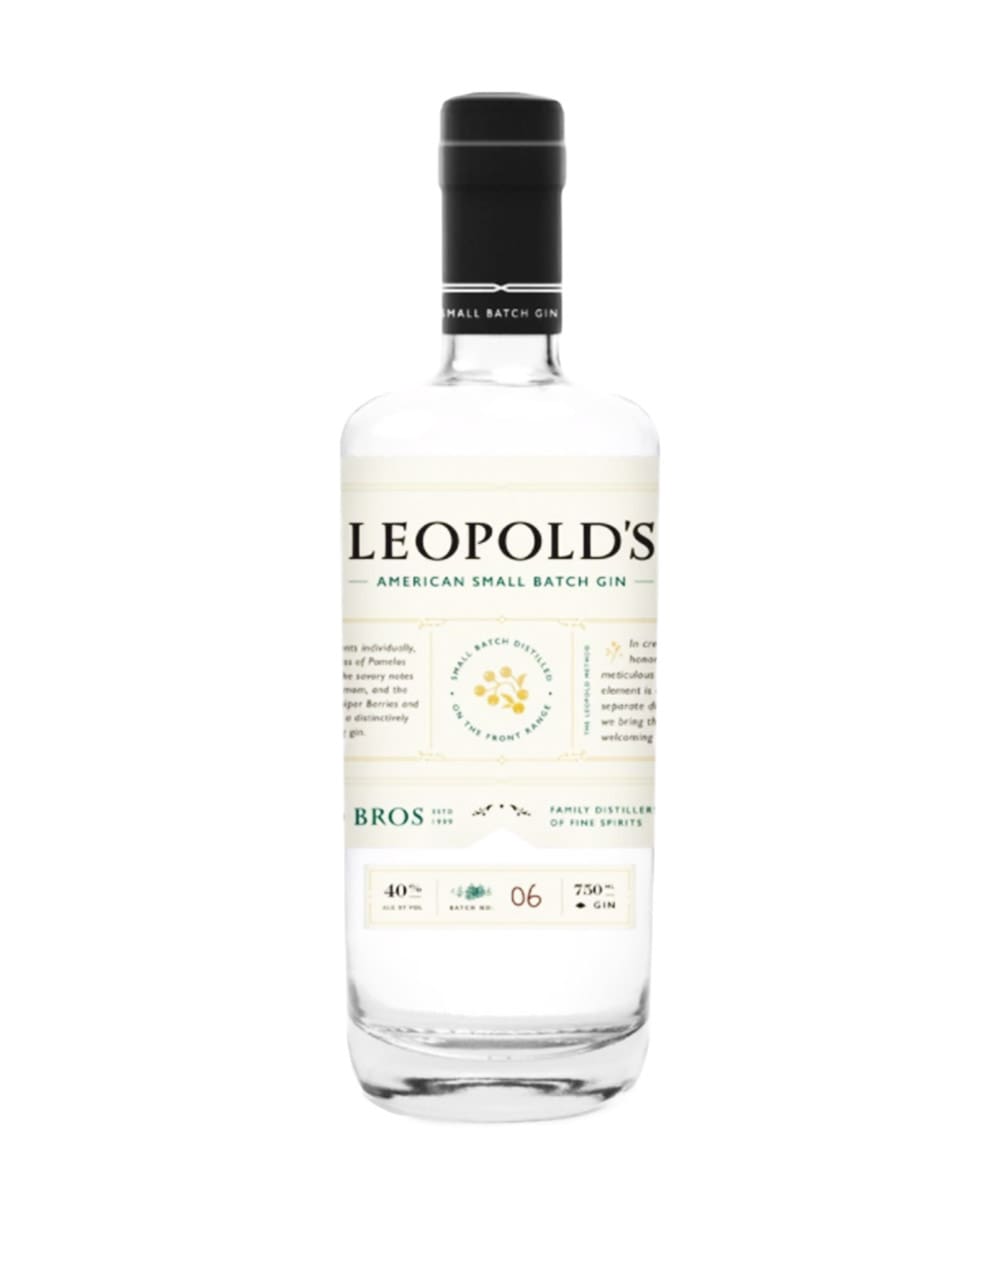 Leopolds Bros American Small Batch Gin